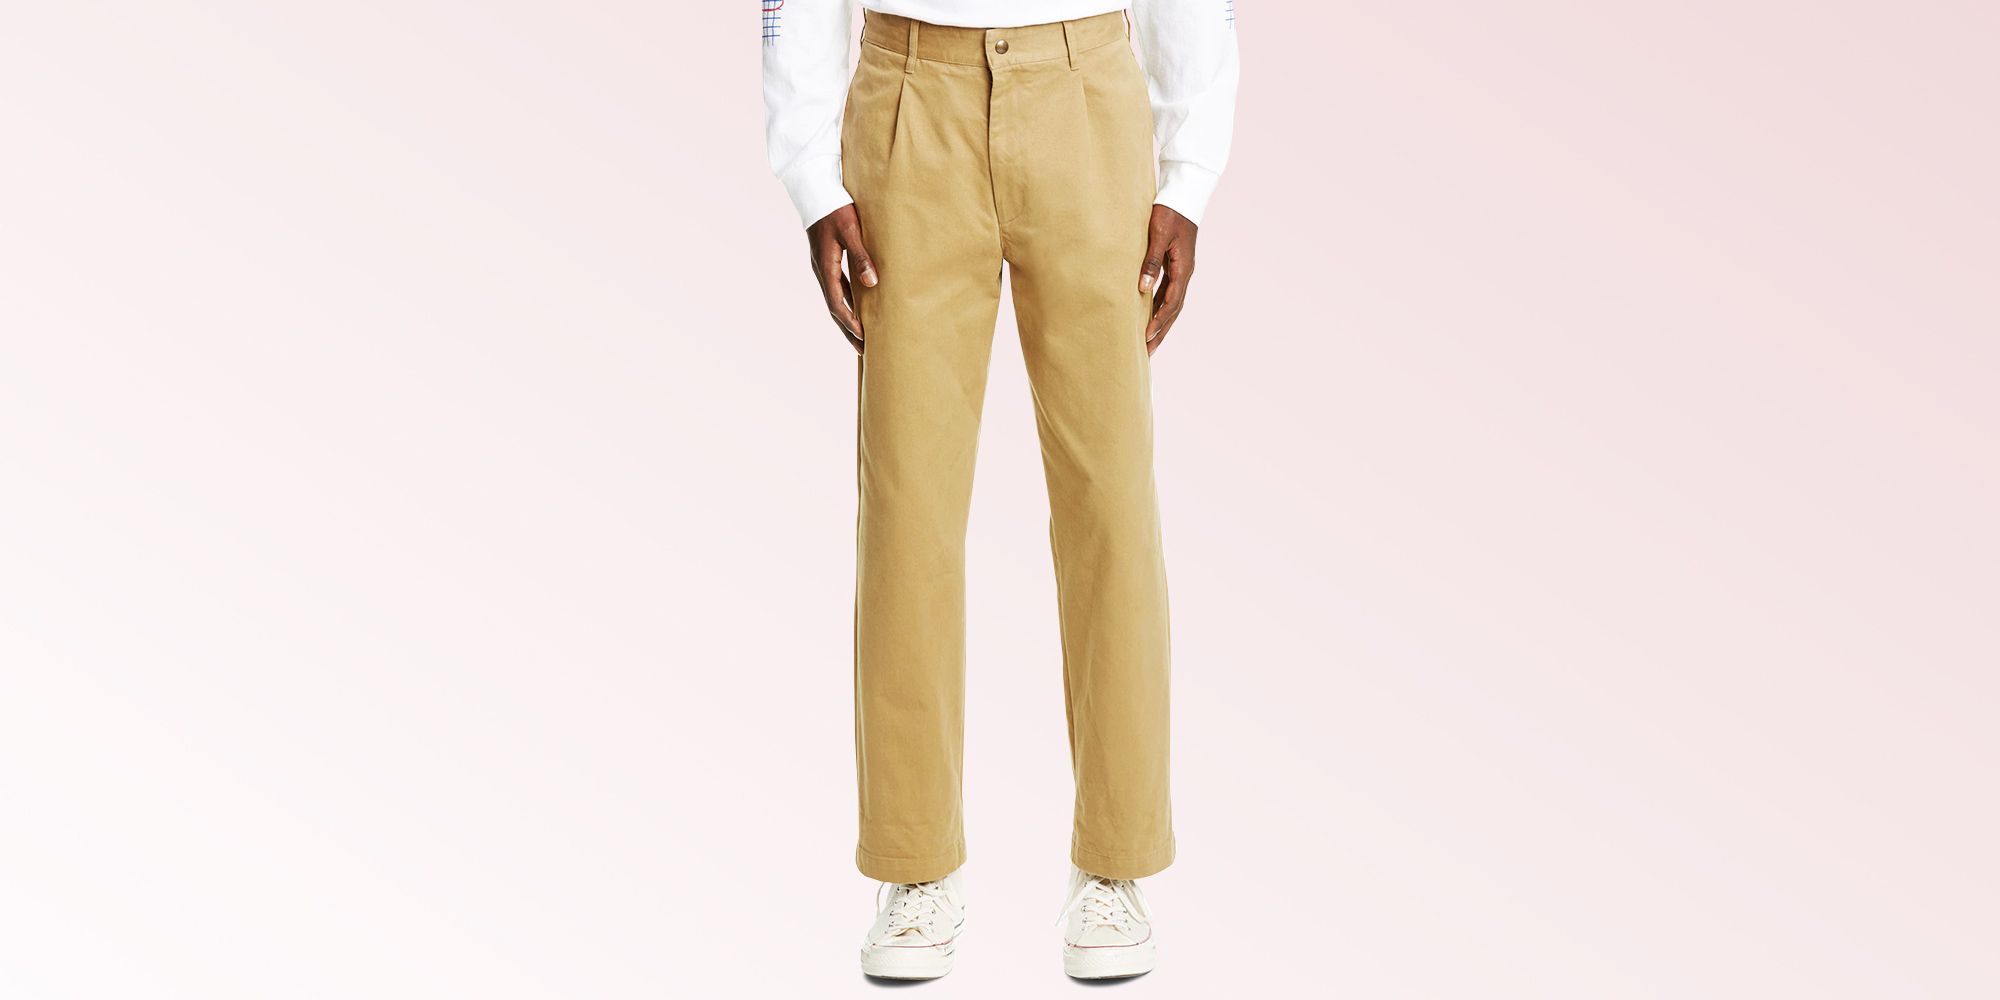 Fashion Trousers Pleated Trousers Ivy & Oak Pleated Trousers khaki striped pattern casual look 